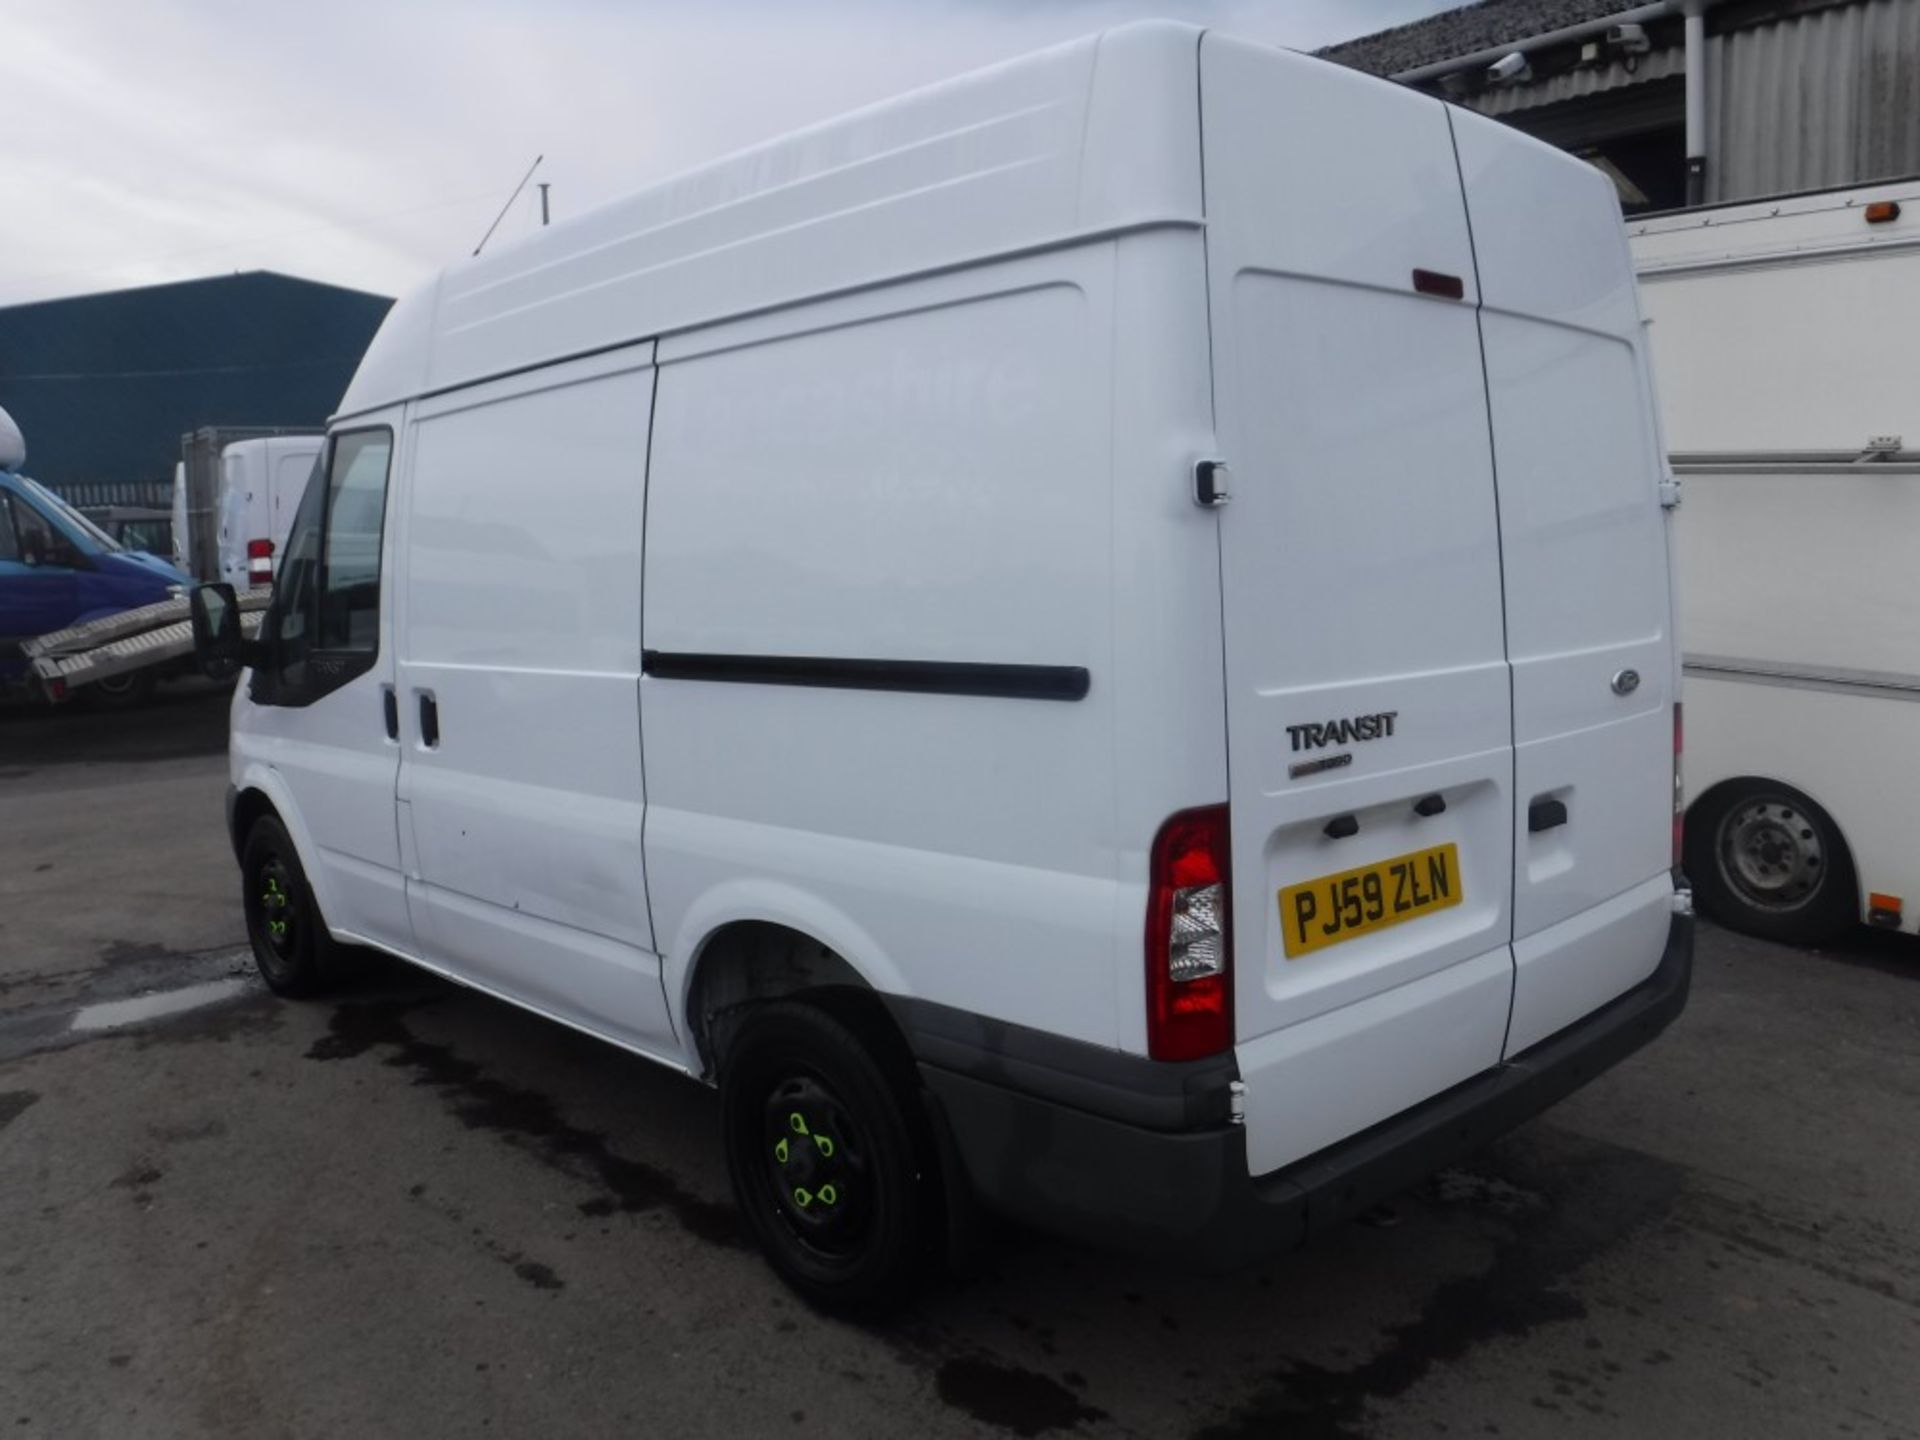 59 reg FORD TRANSIT T280S FWD VAN (DIRECT COUNCIL) 1ST REG 01/10, 108748M, V5 HERE, 1 OWNER FROM NEW - Image 3 of 5